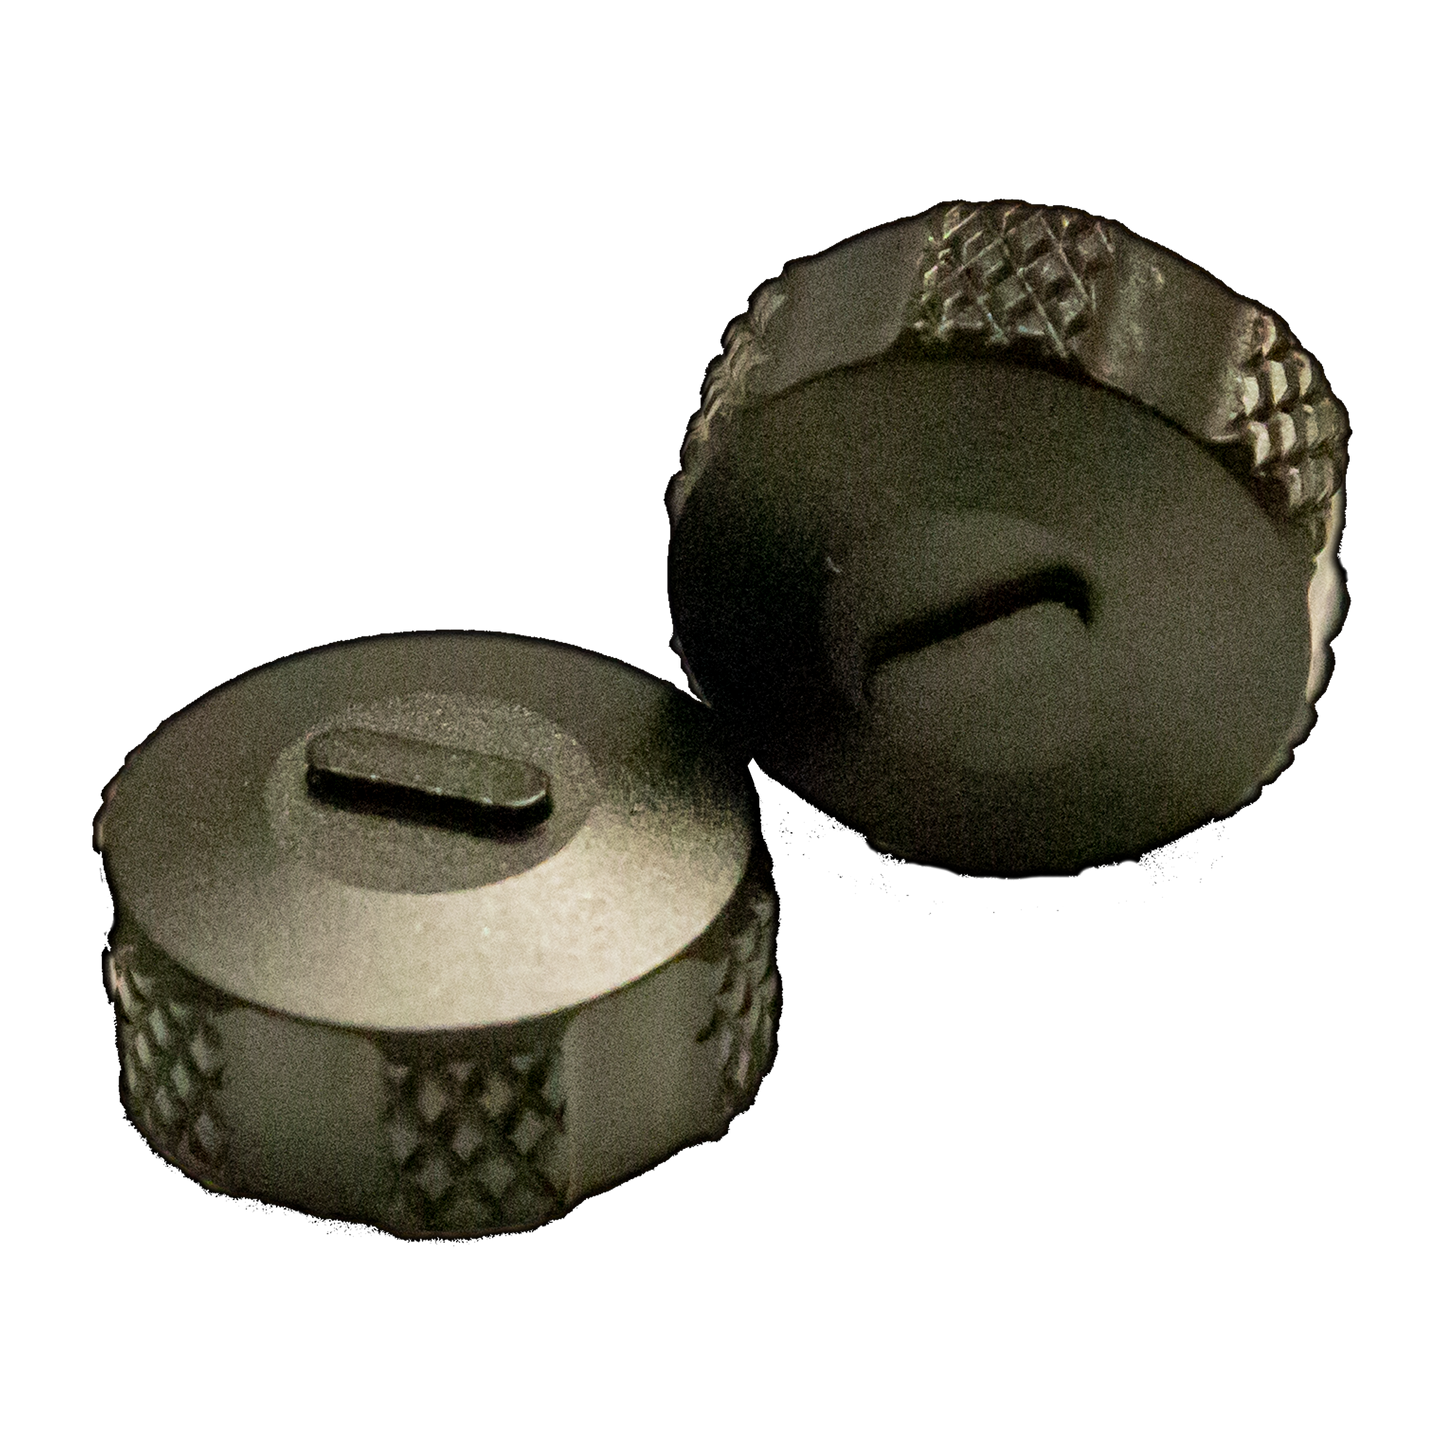 a pair of metal knobs on a black background